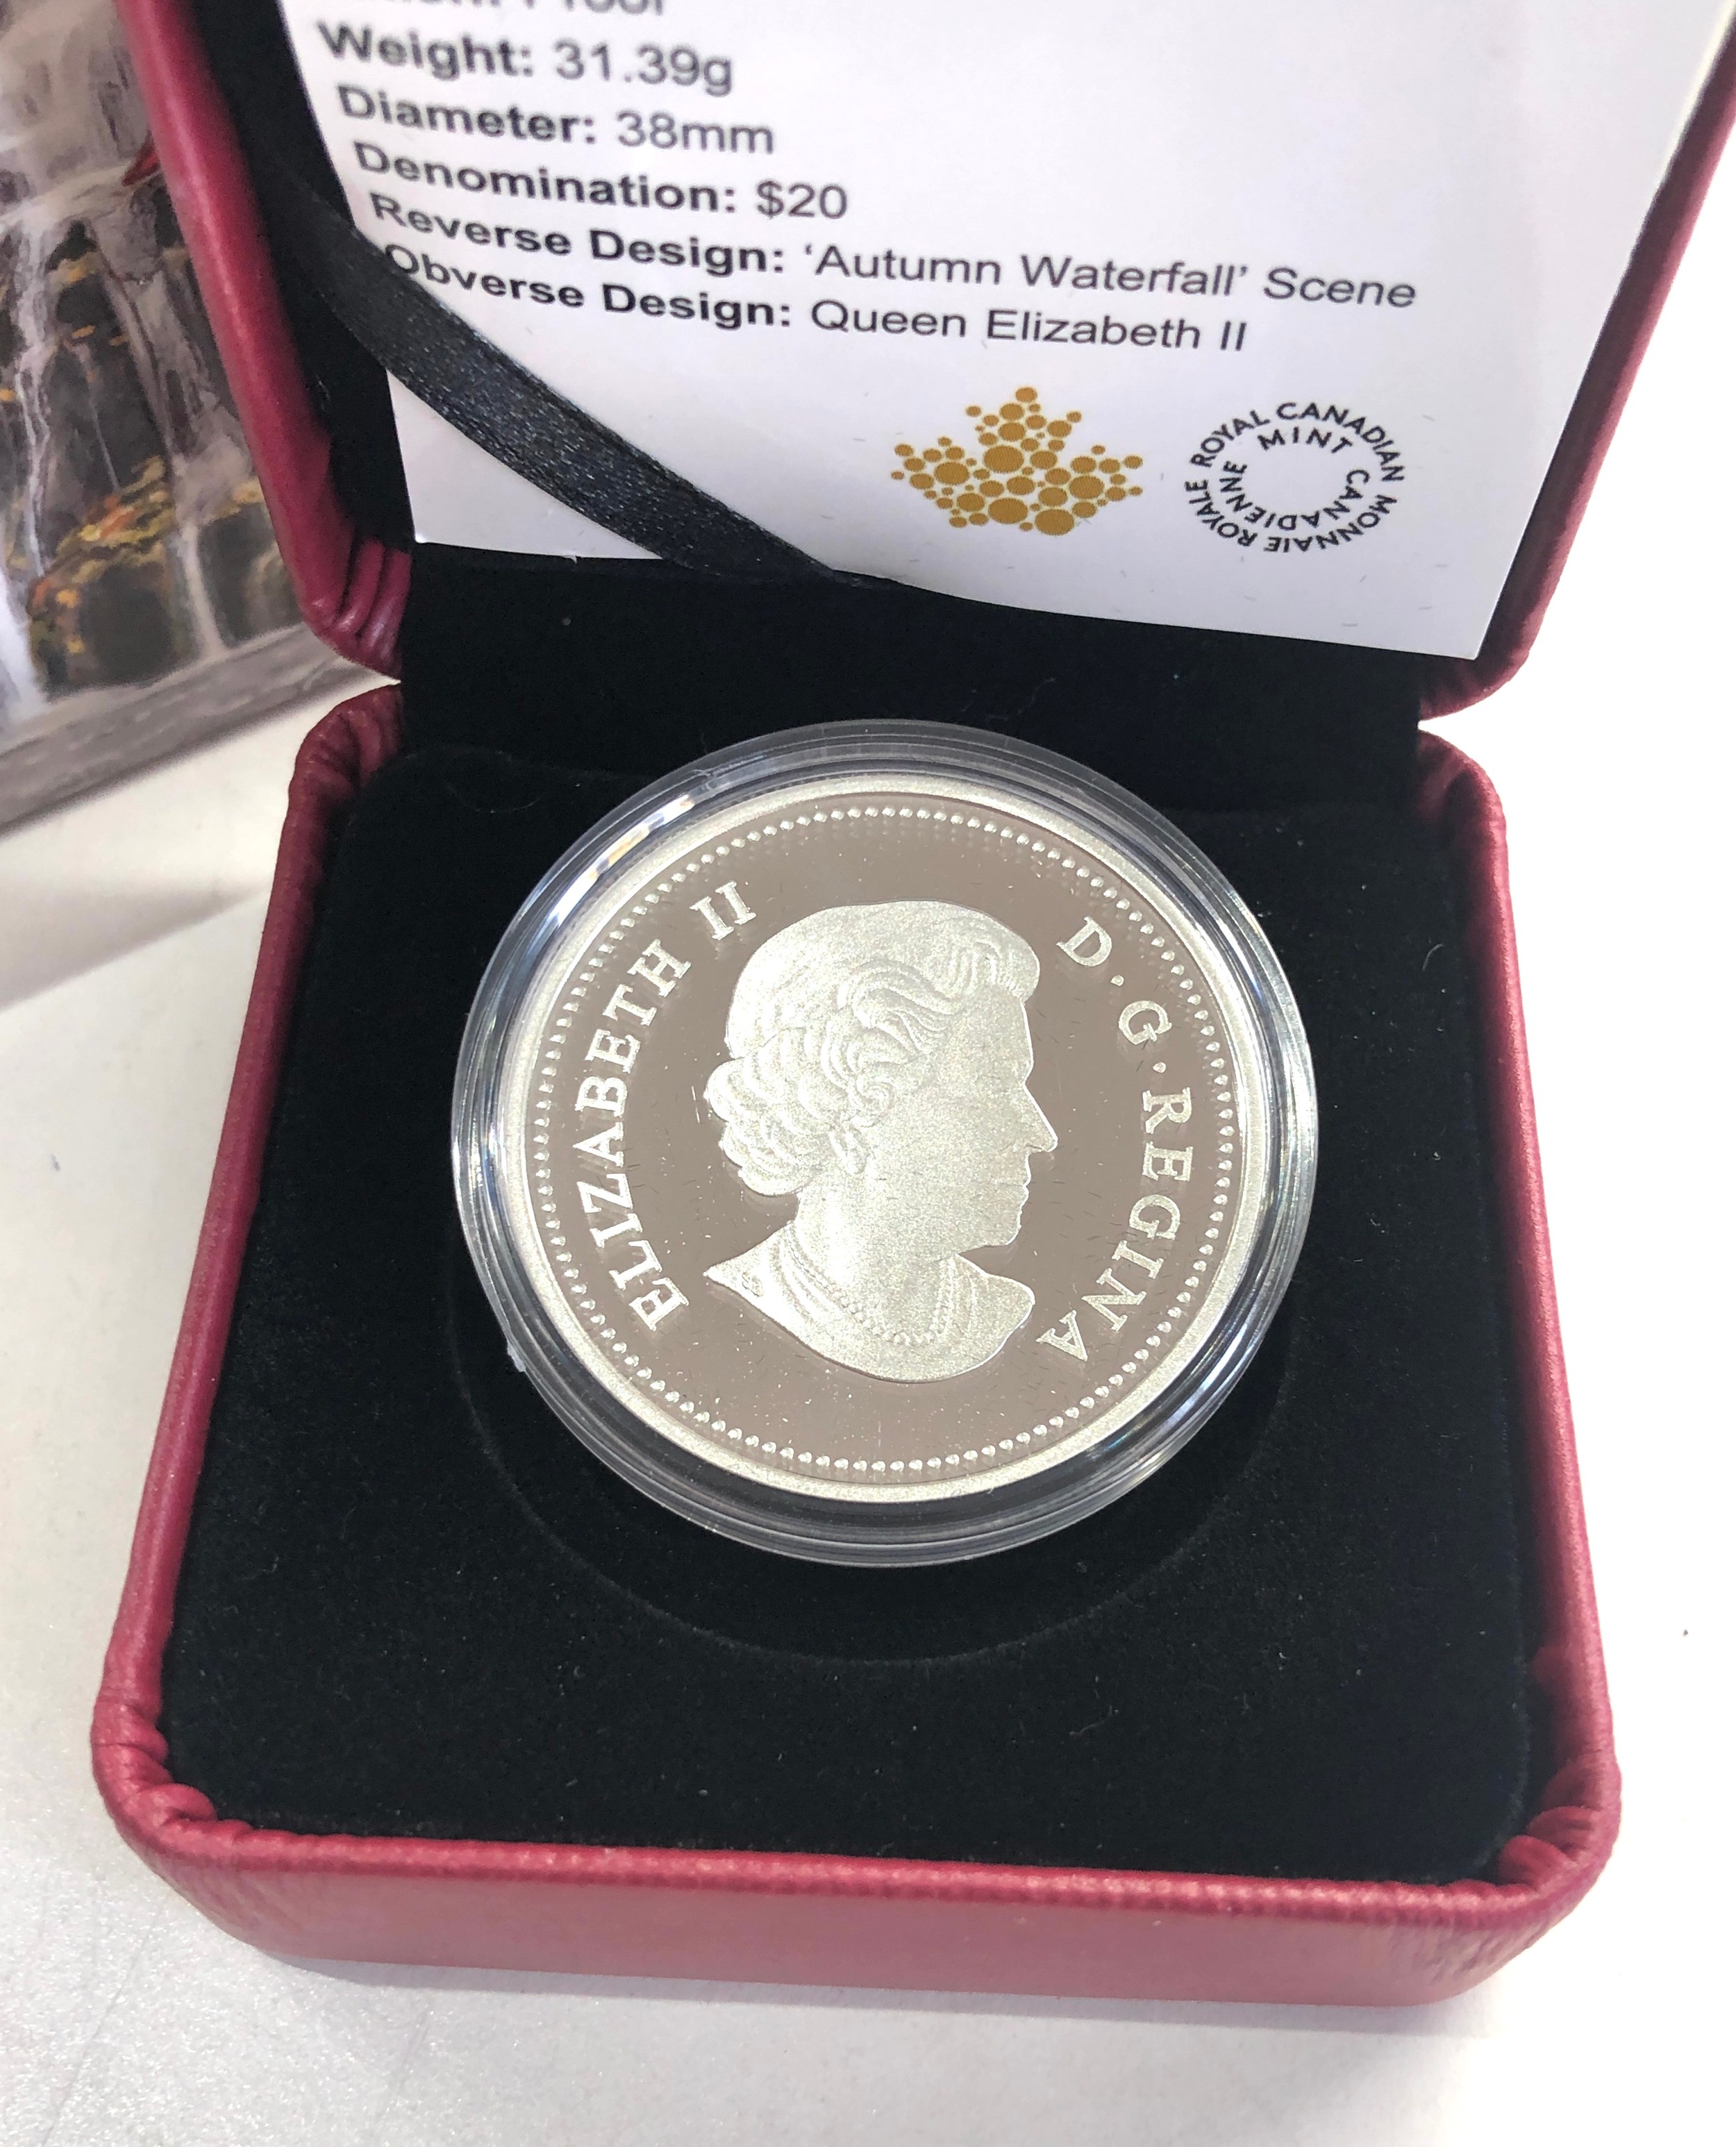 Boxed silver proof limited edition 999. 2014 silver coin cascades of autumn - Image 4 of 5